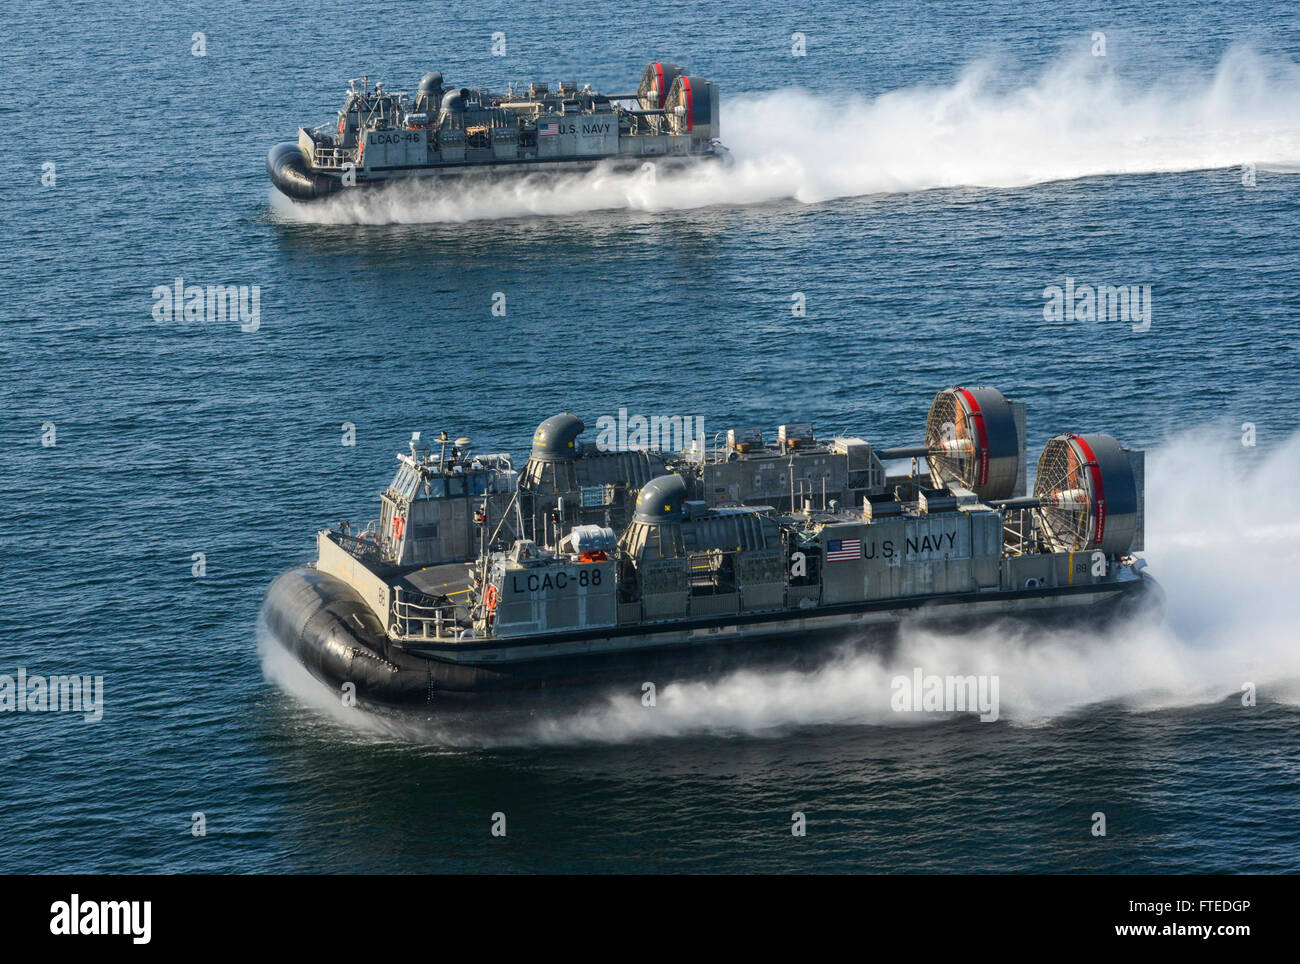 150612-N-HX127-125  Baltic Sea (Feb. 12, 2015) -- US Navy LCACs perform maneuvers during Baltic Operations (BALTOPS) 2015. BALTOPS is an annual multinational exercise designed to enhance flexibility and interoperability, as well as demonstrate resolve among allied and partner forces to defend the Baltic region. (U.S. Navy photo by Mass Communications Specialist 3rd Class Timothy M. Ahearn/Released) Stock Photo